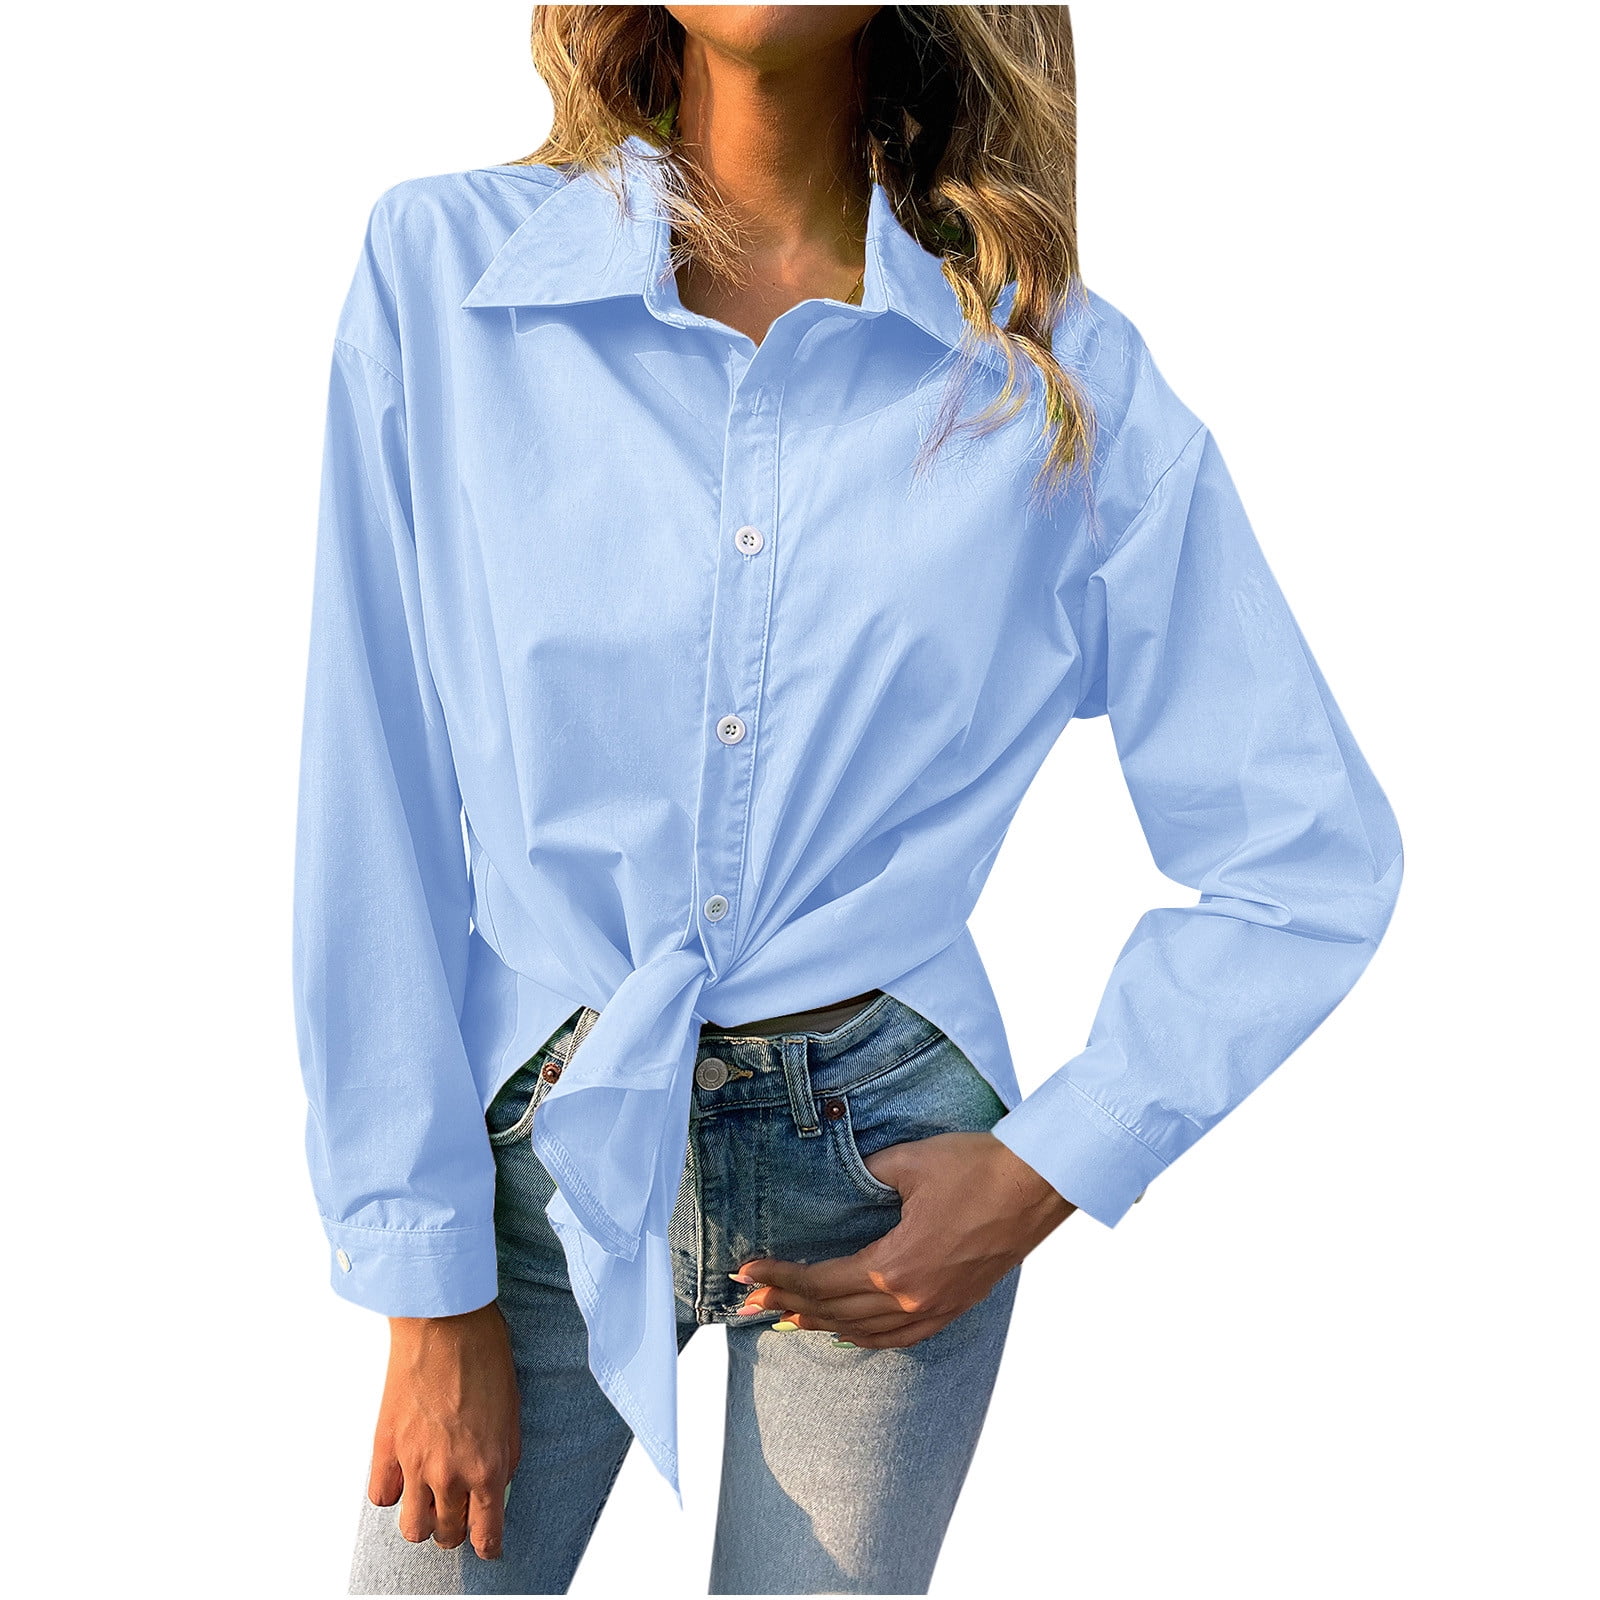 JWZUY Women Solid Color Shirts Casual Long Sleeve V Neck Shirt